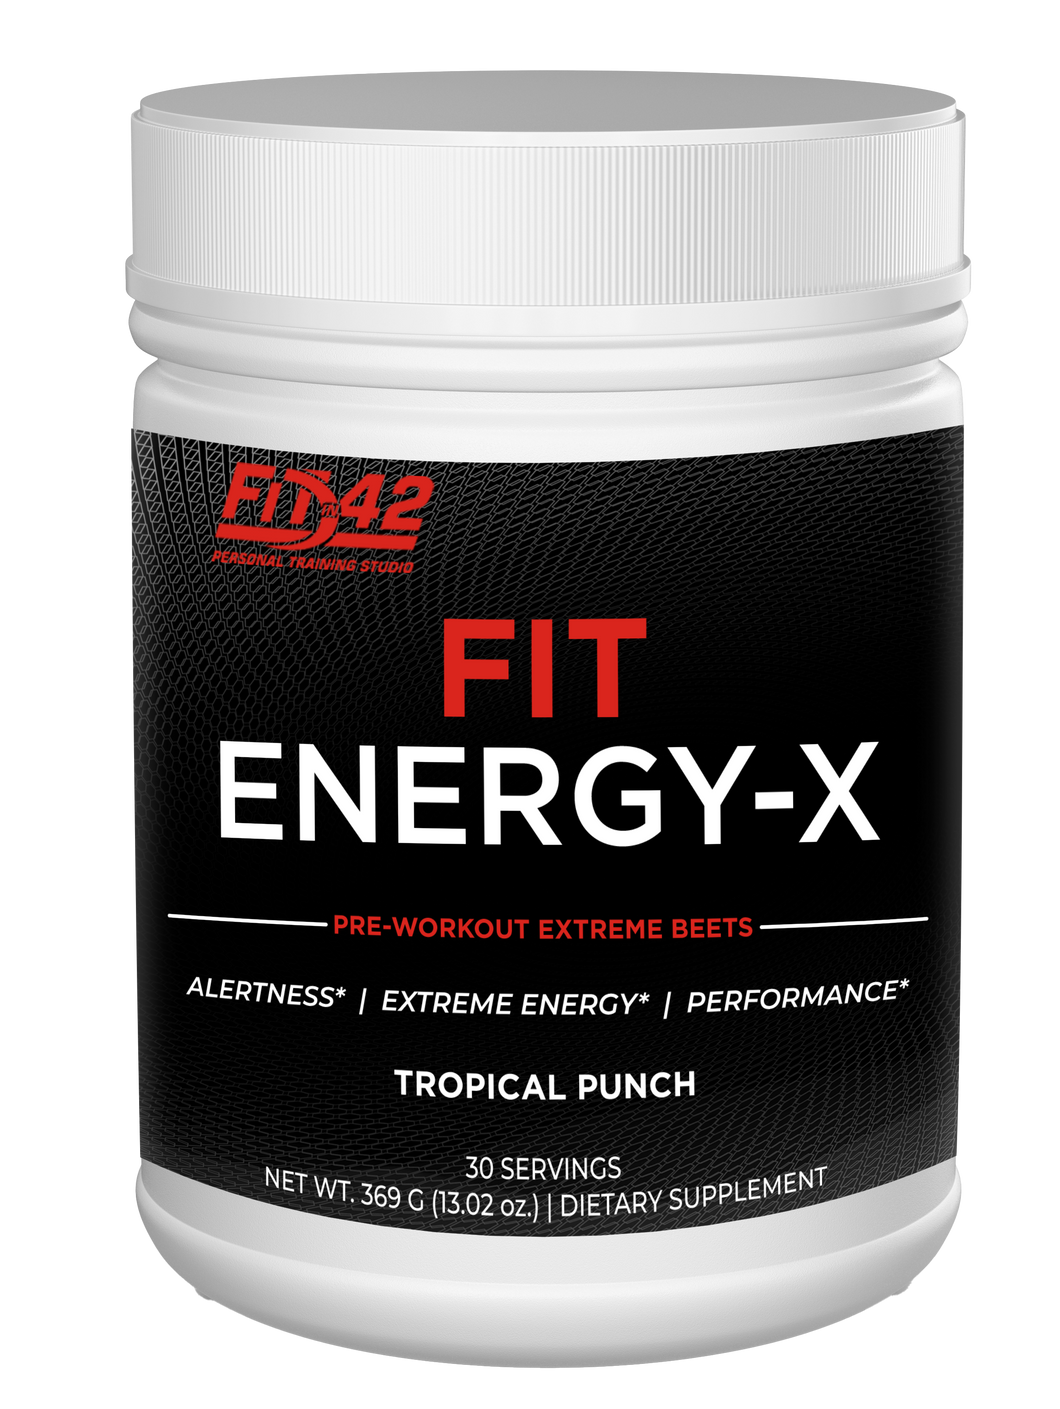 Fit Energy-X Pre-Workout